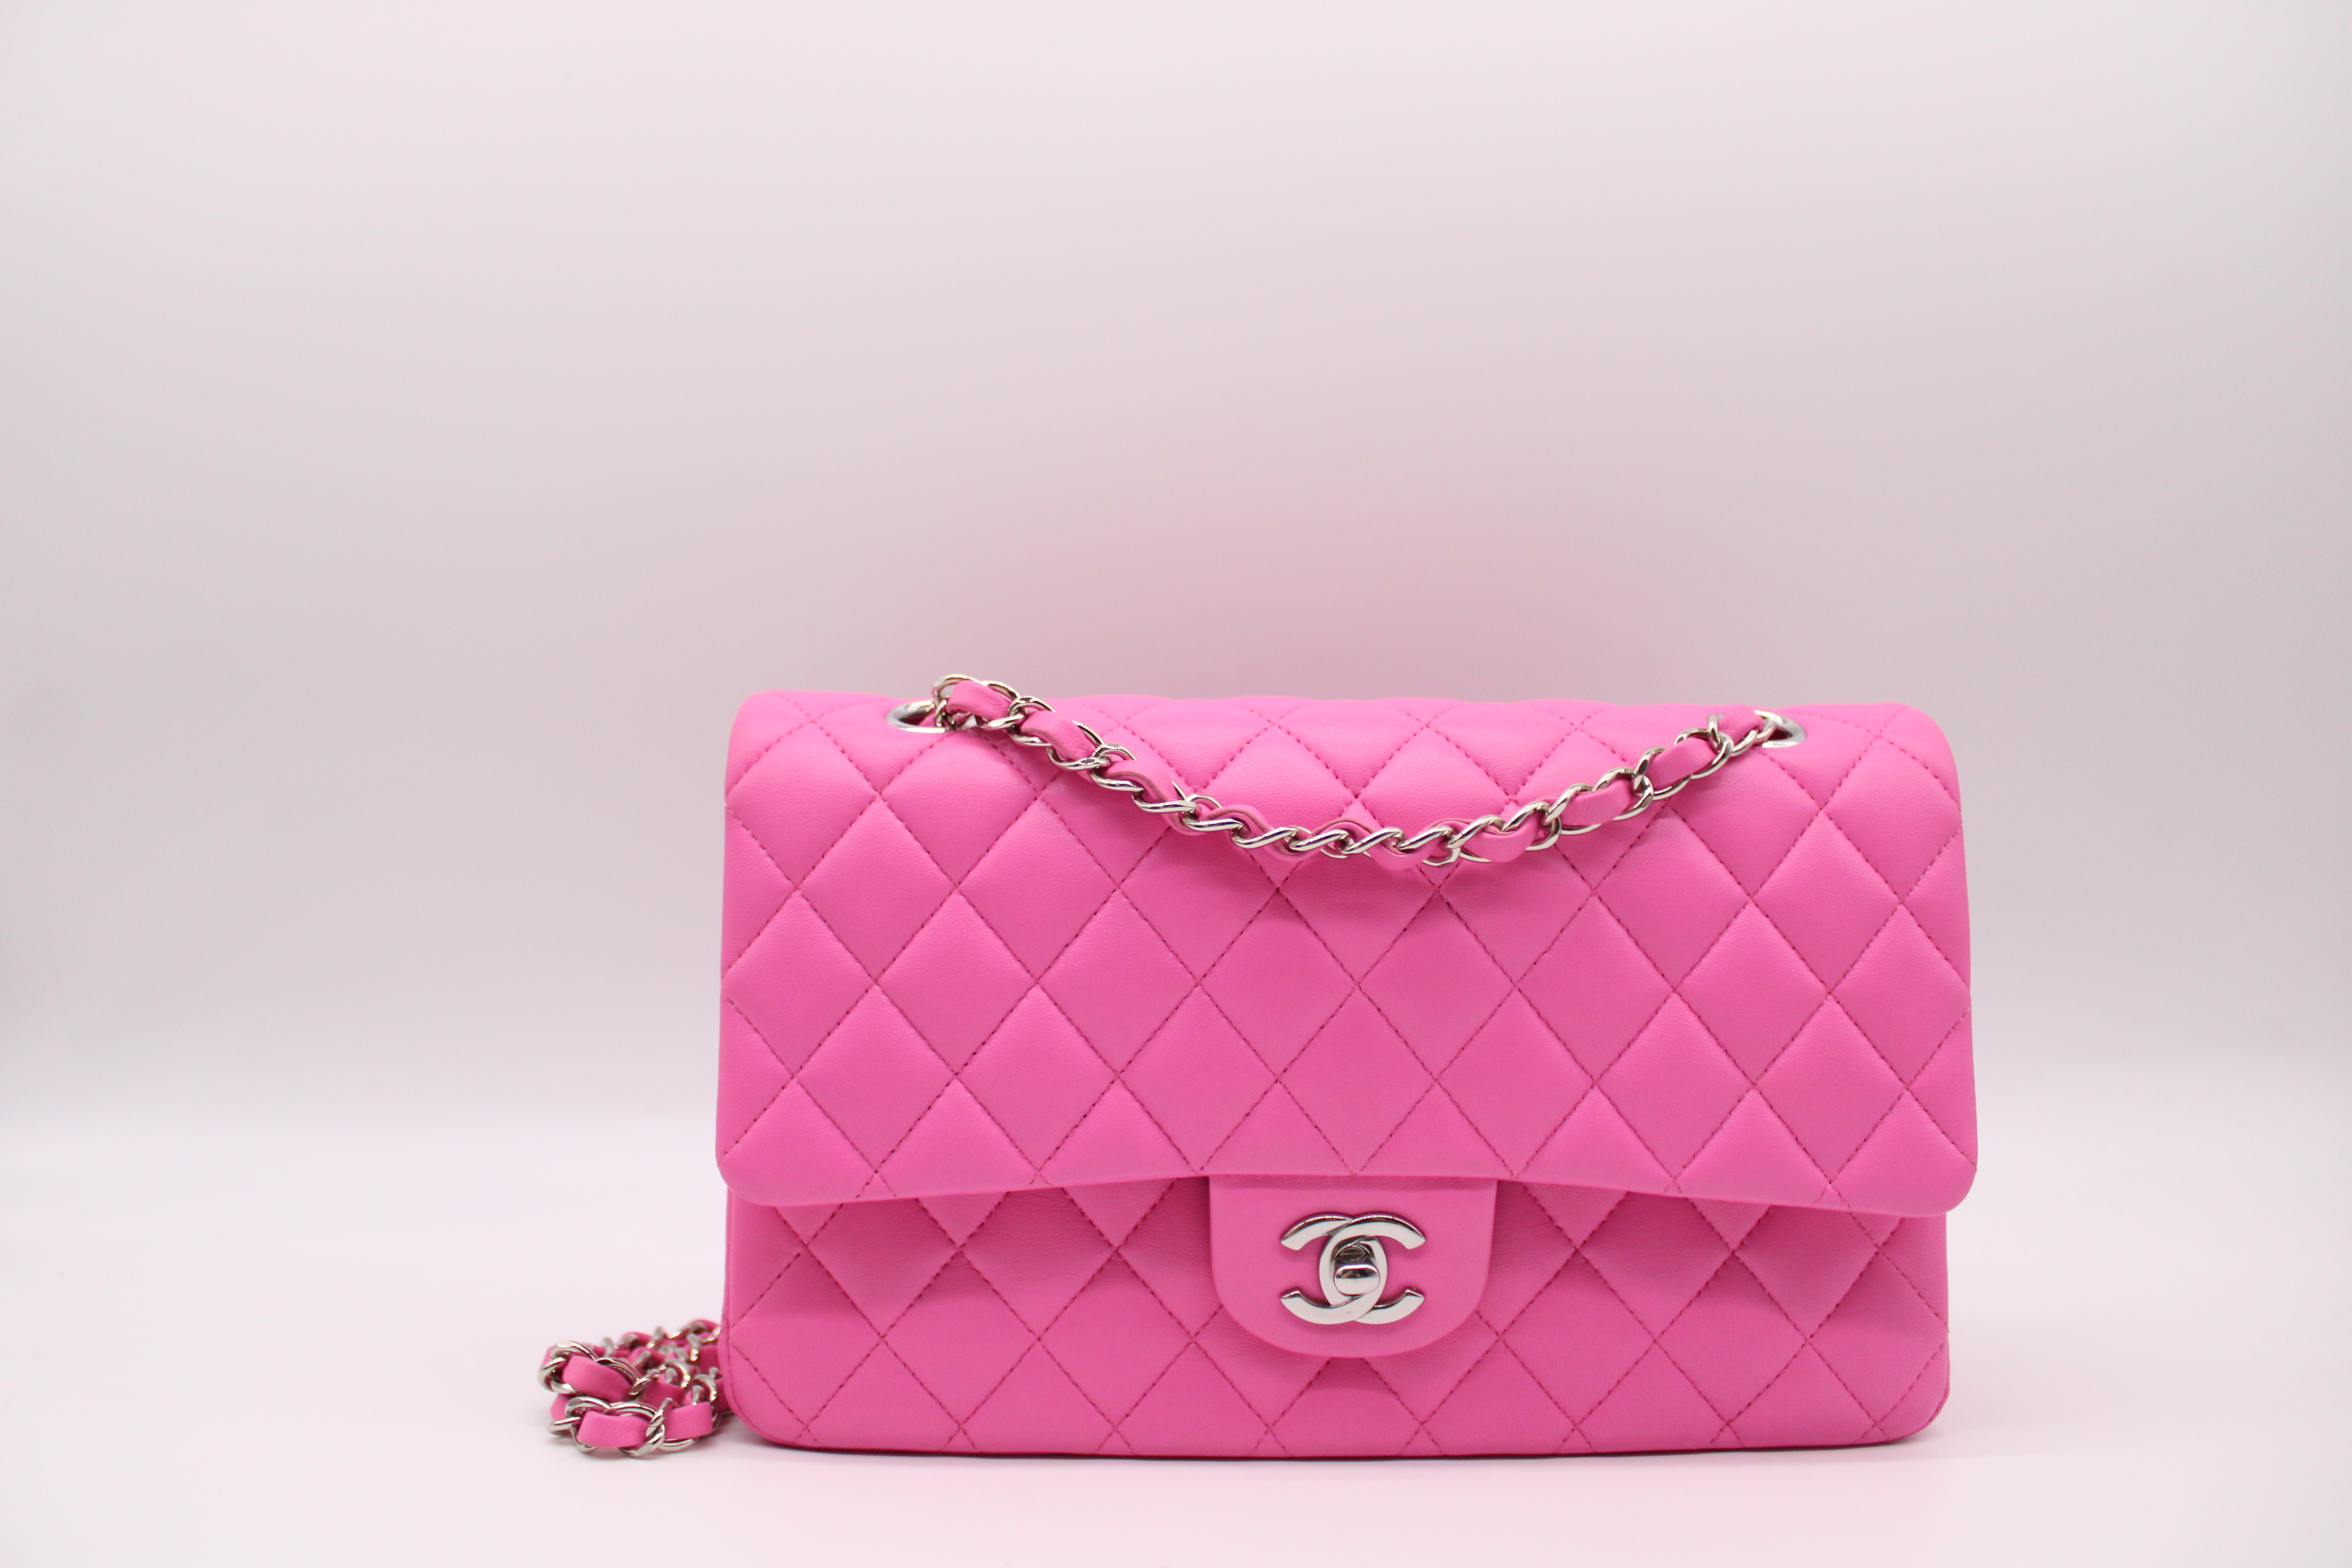 Chanel Classic Medium Flap, Pink Lambskin Leather, Silver Hardware,  Preowned in Dustbag MA001